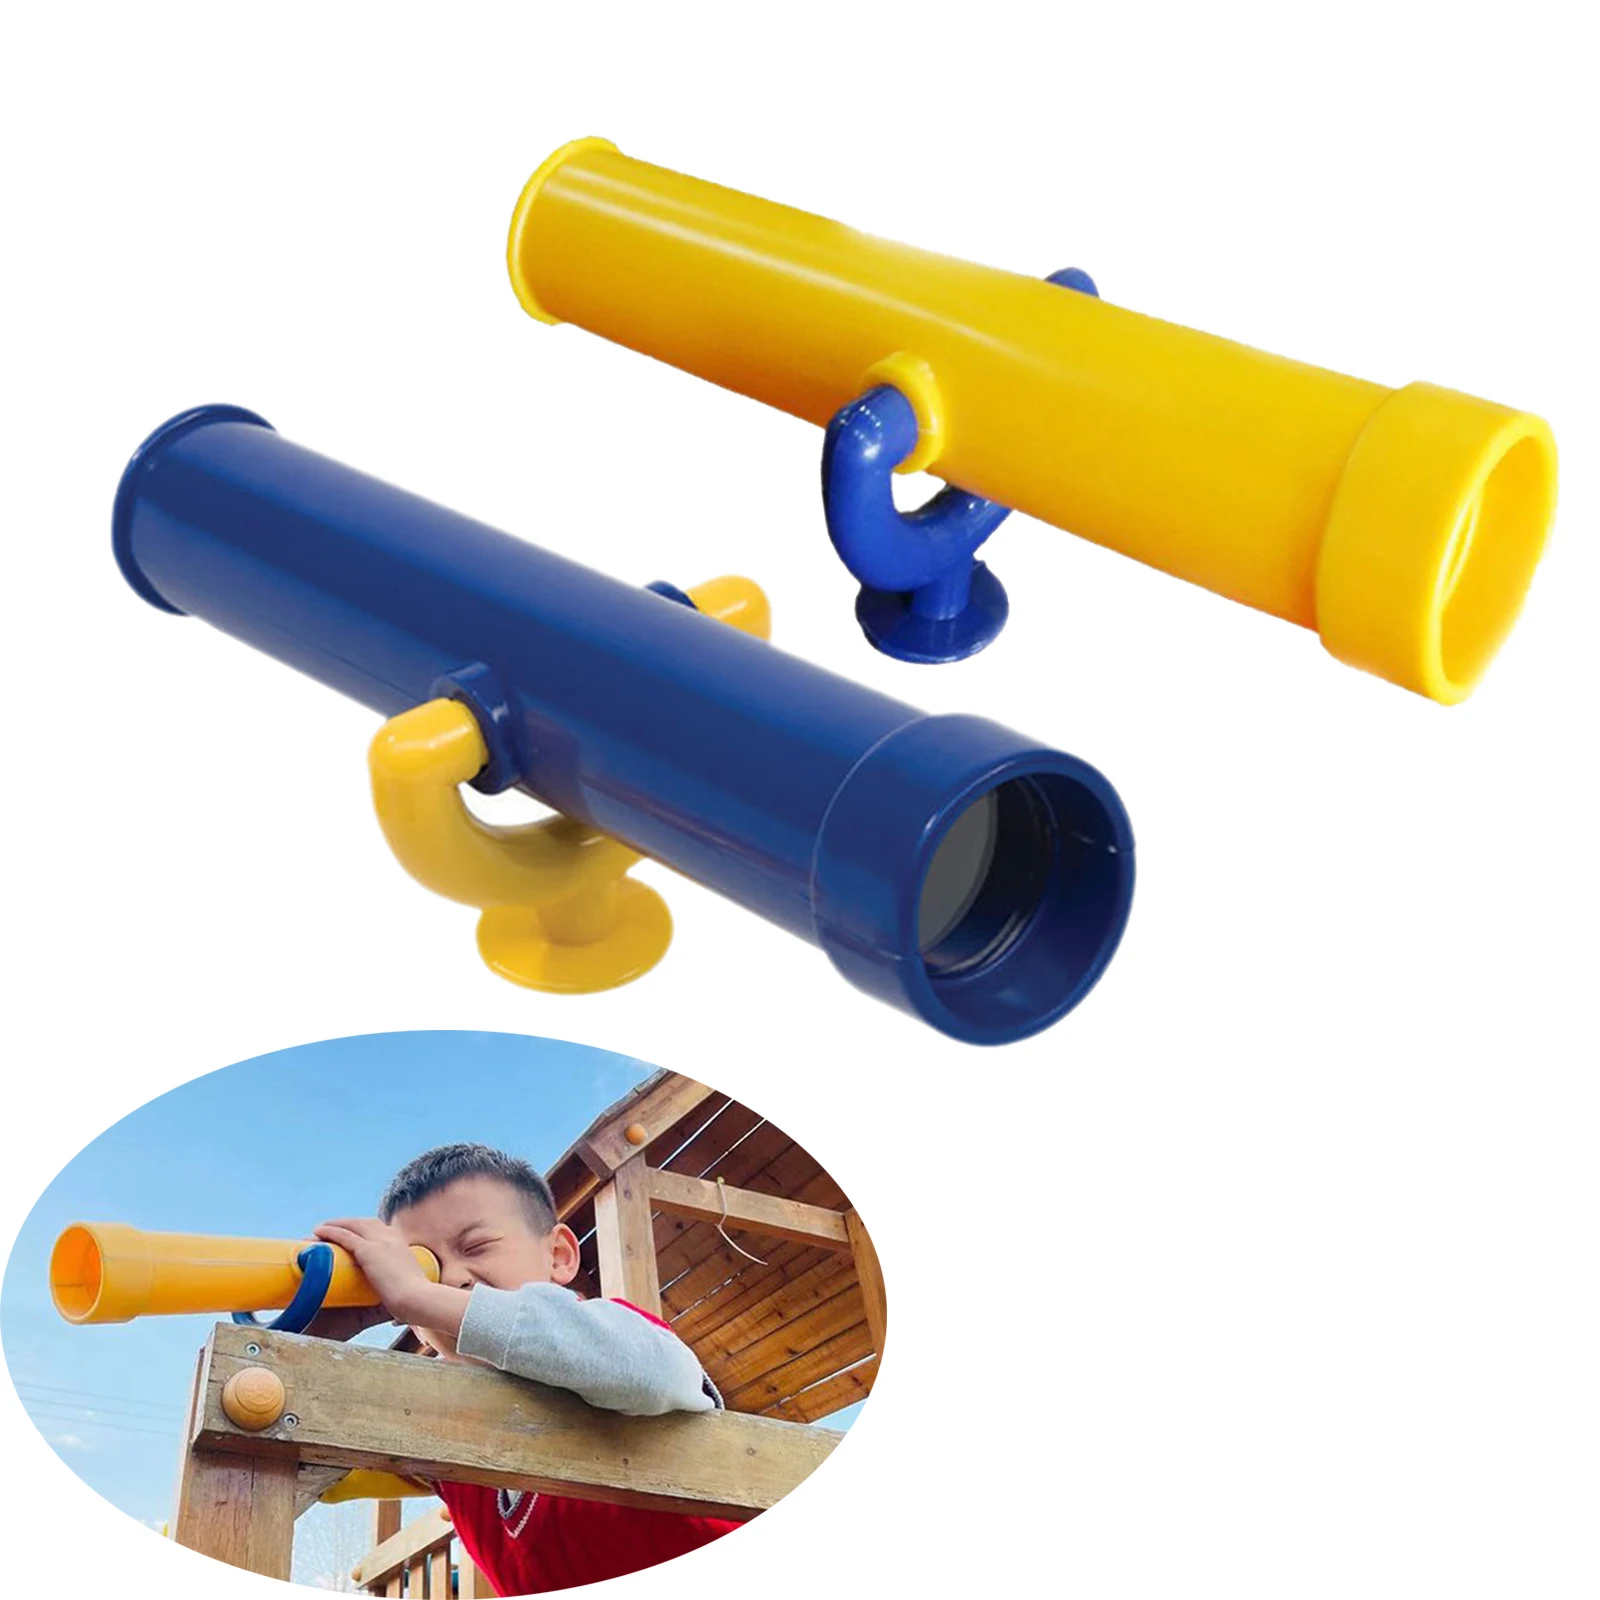 Kids Playground Monocular Pirate Telescope Plastic Pretend Toy for Boys Girls Interactive Learning Ages 3+